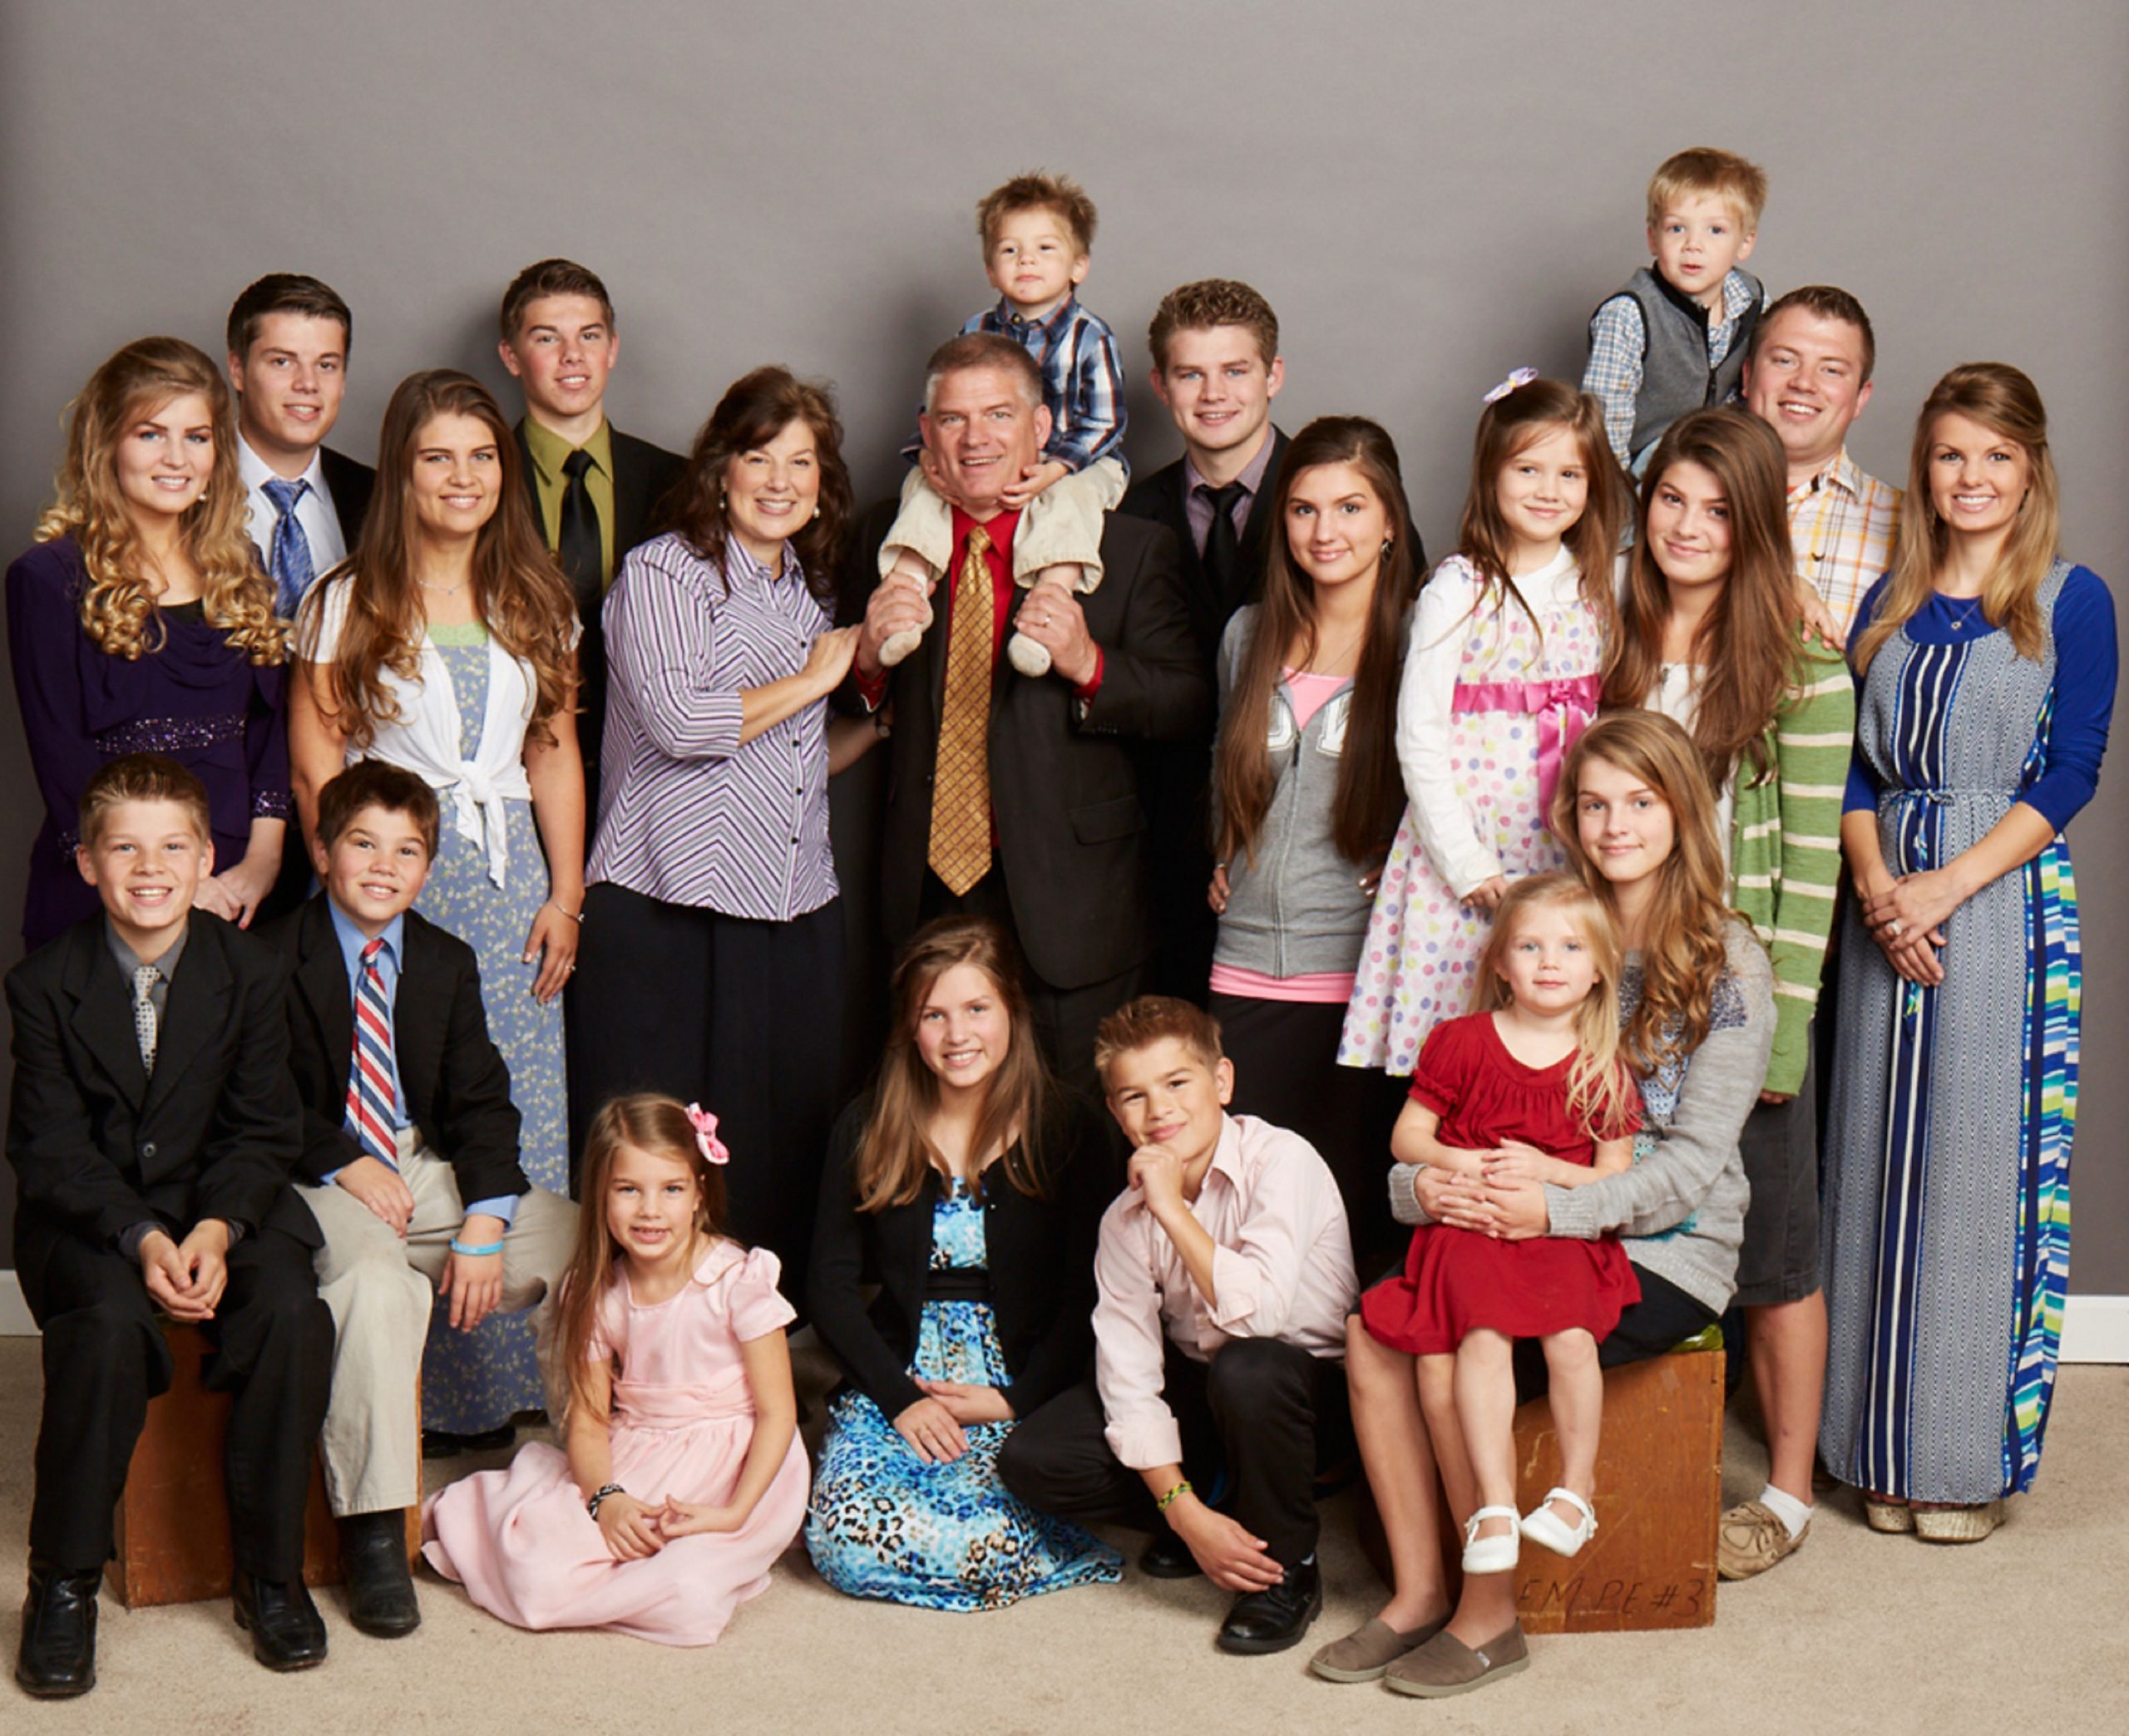 Group photo of the entire Bates family from 'Bringing Up Bates' in 2014 